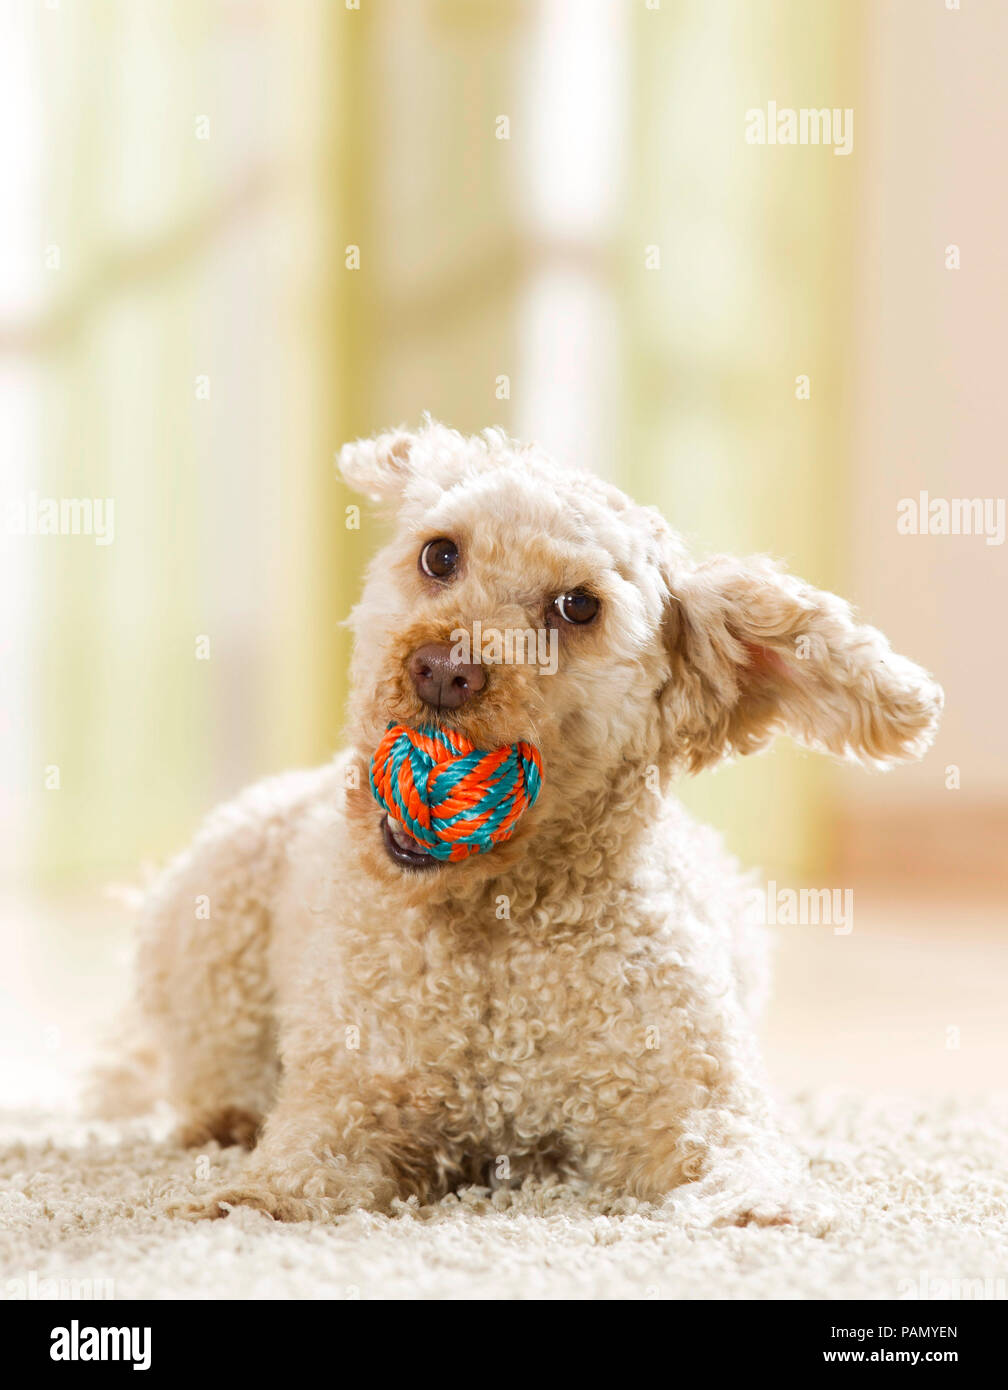 A poodle lies on carpet with a small ball in its muzzle. Germany. Stock Photo